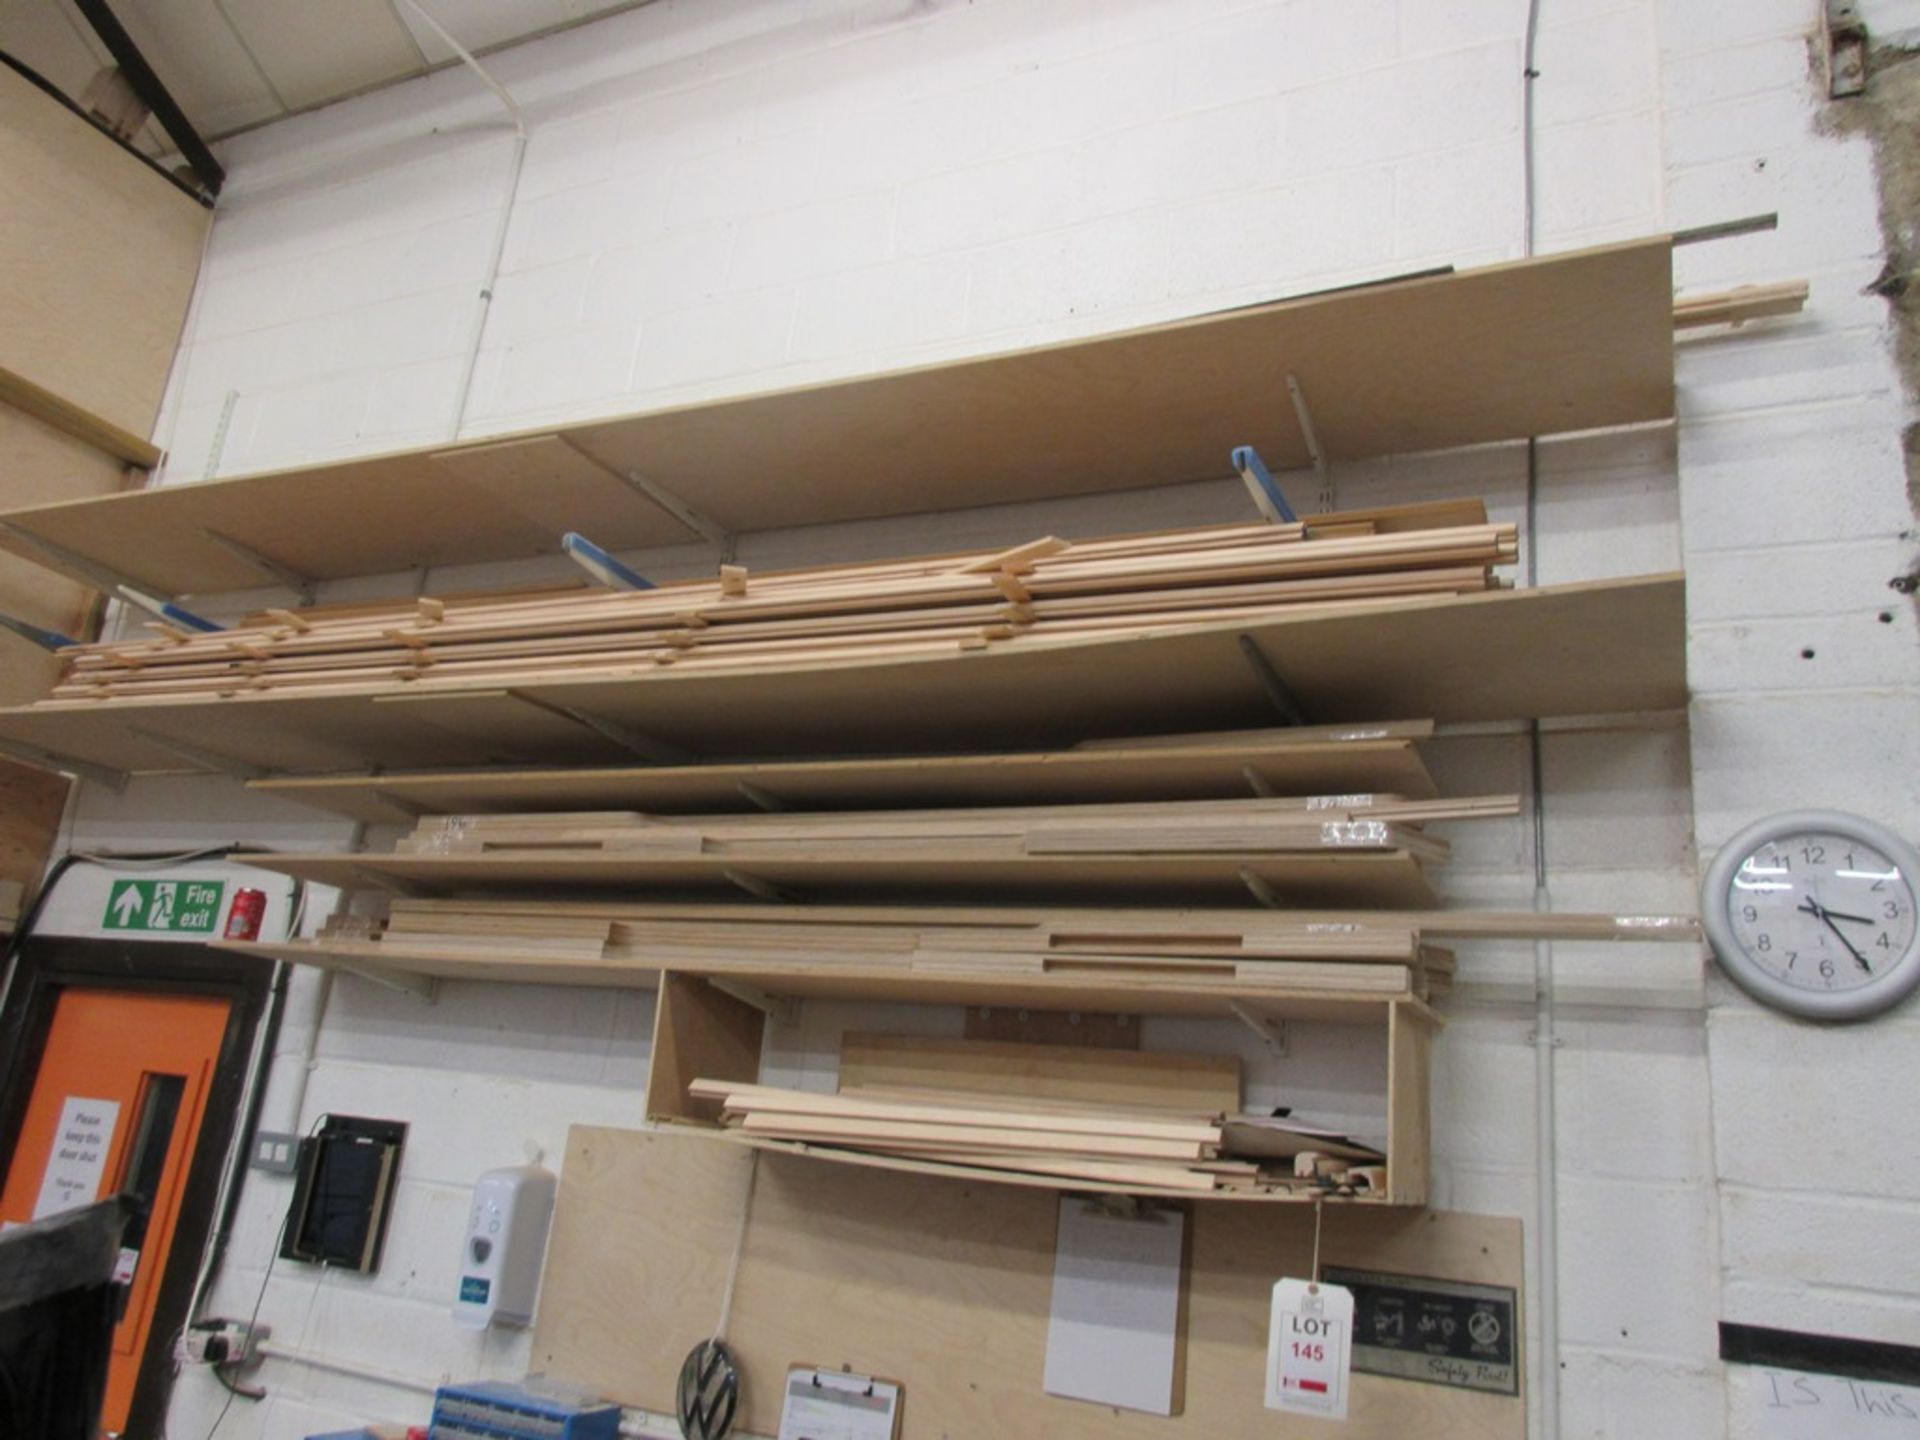 Contents of shelves including solid timber corner posts, plywood profiles etc., as lotted